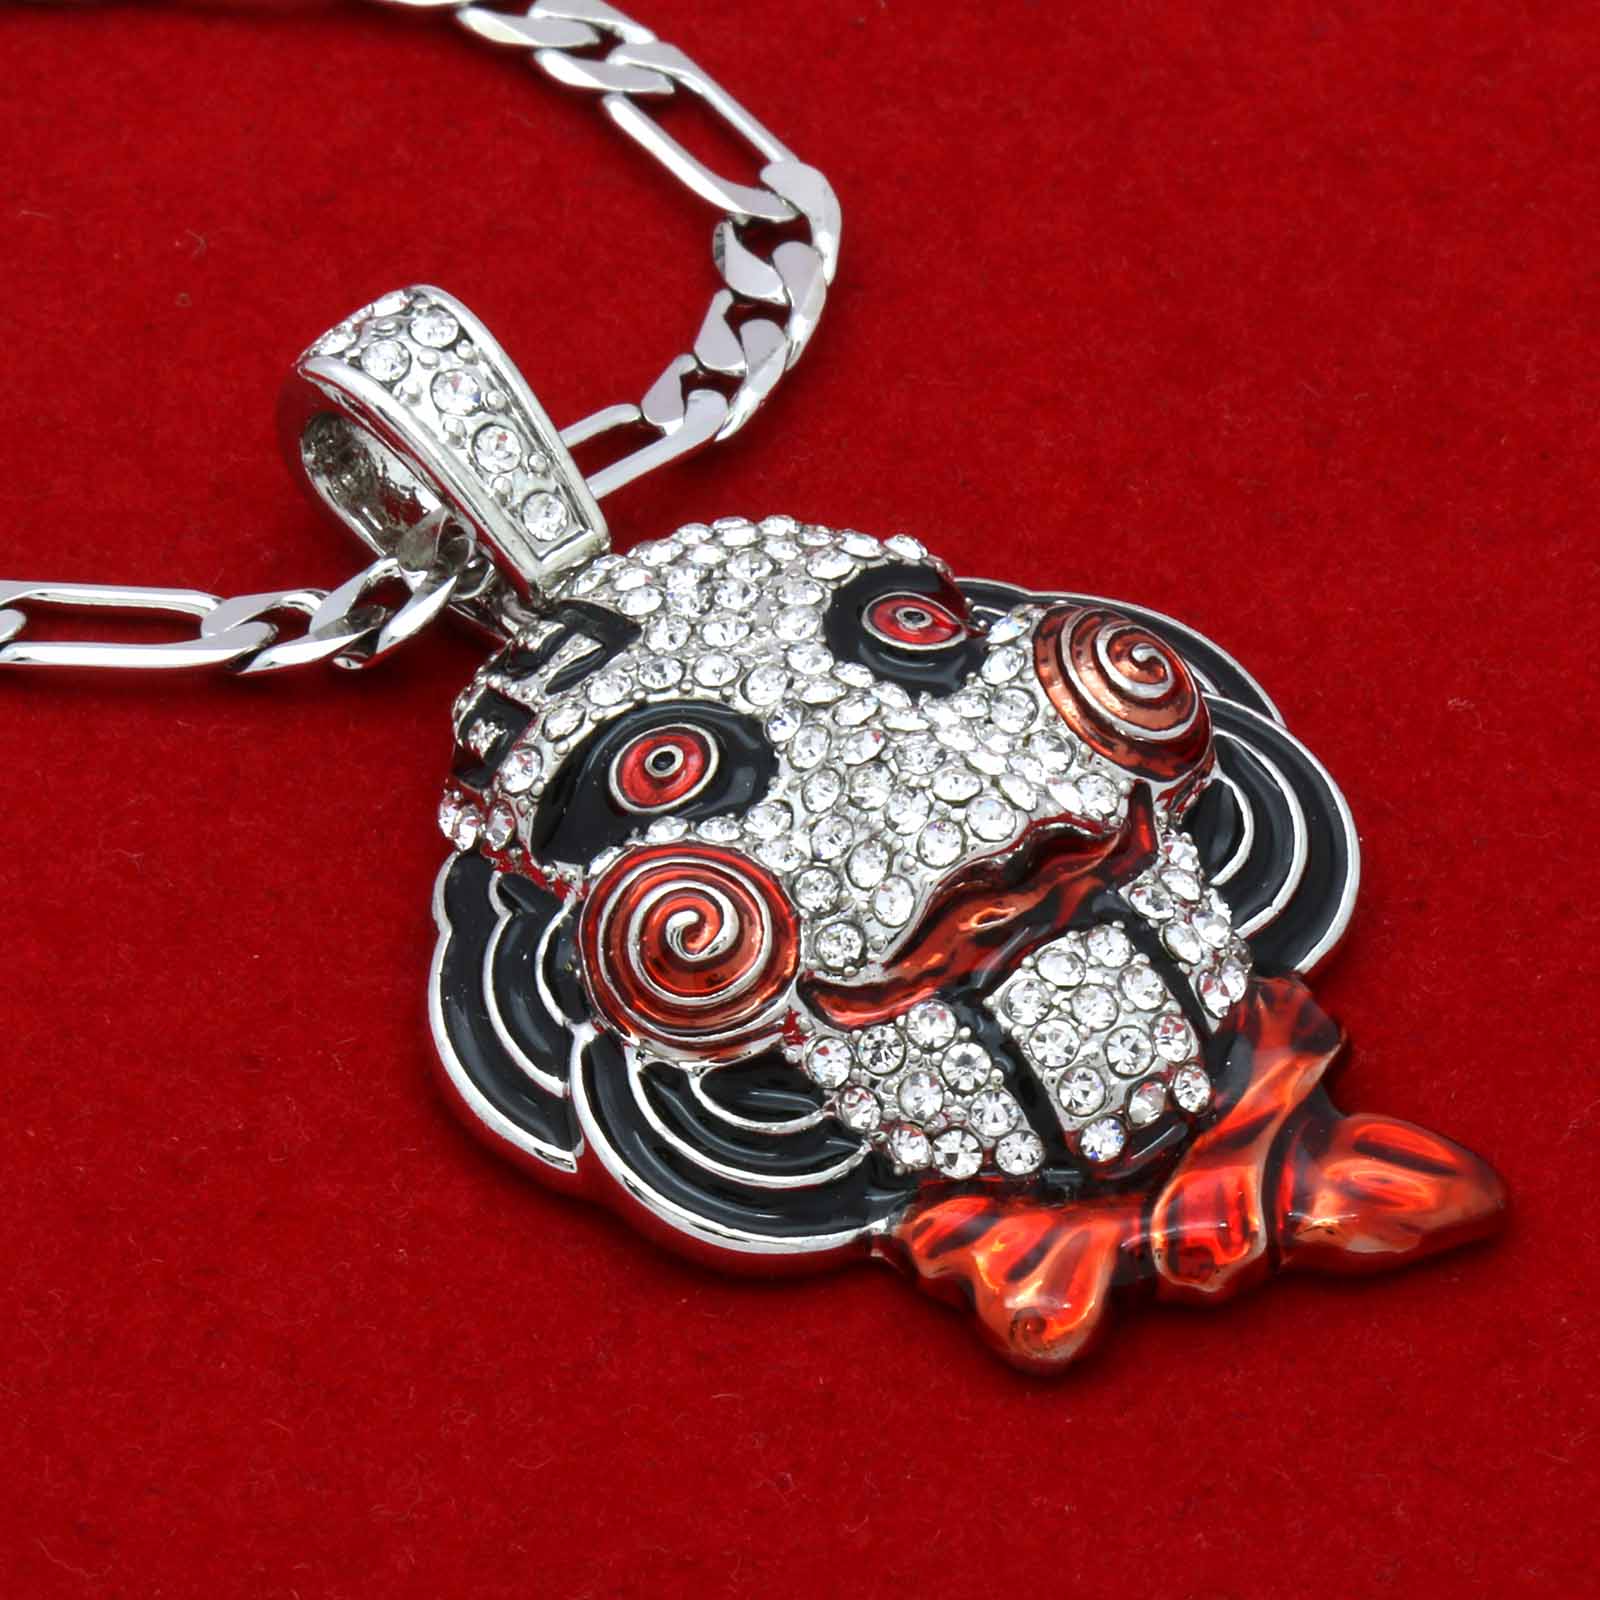 The Saw 69 Necklace S1